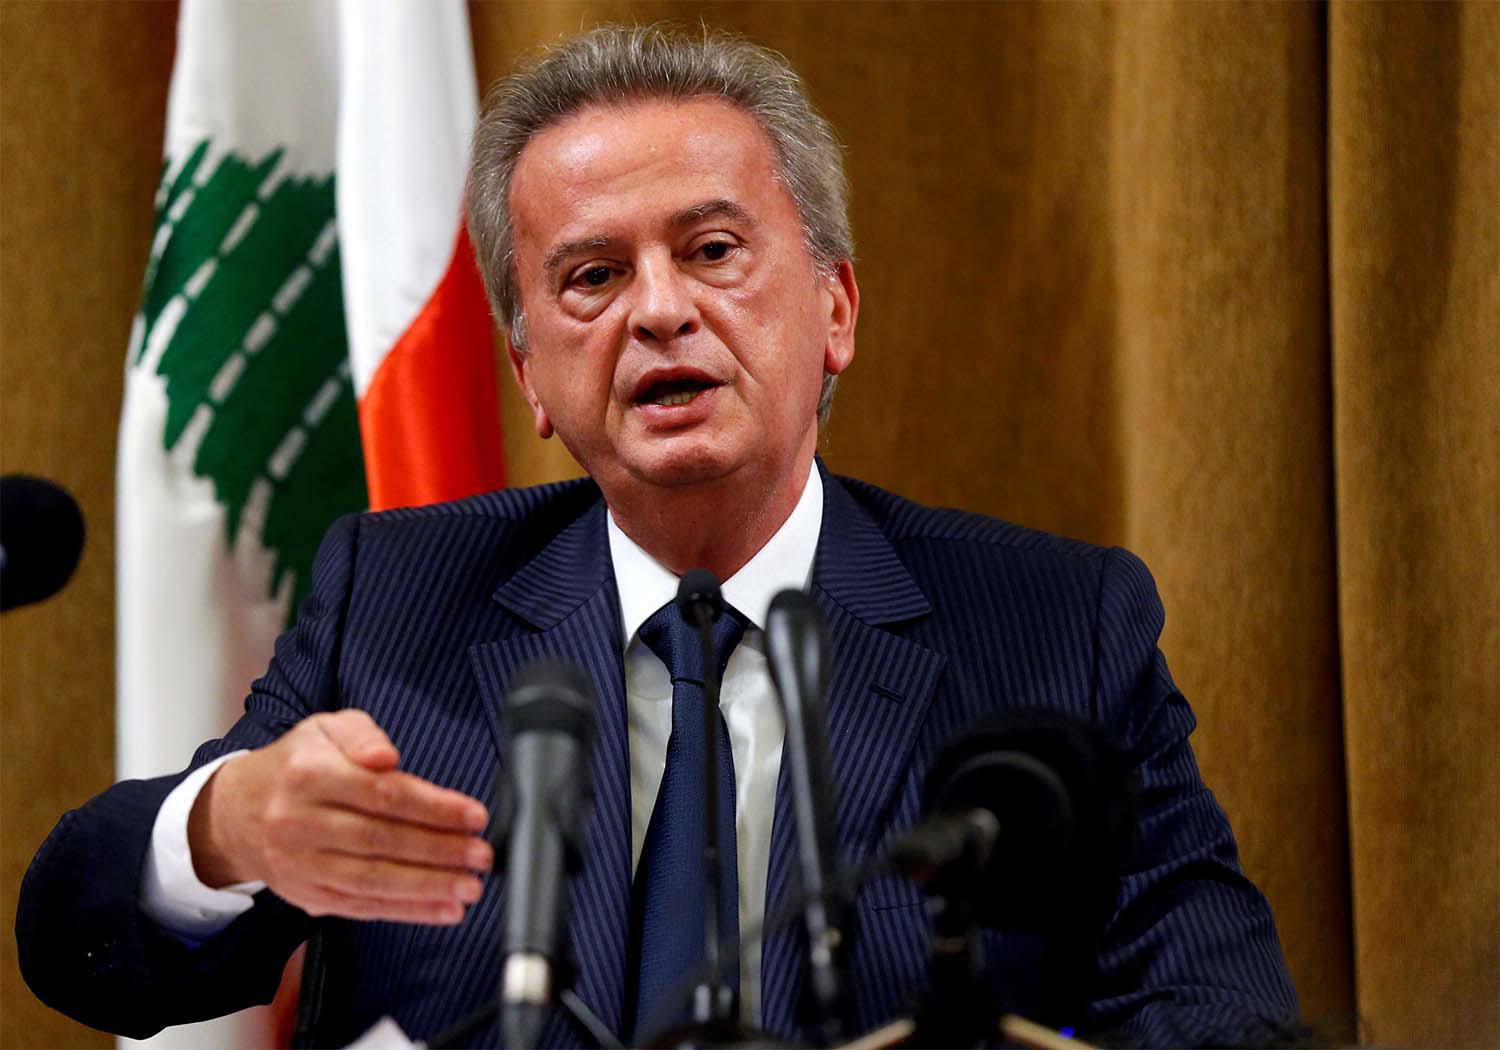 Some Lebanese officials have accused Salameh of using bank secrecy laws to justify withholding information